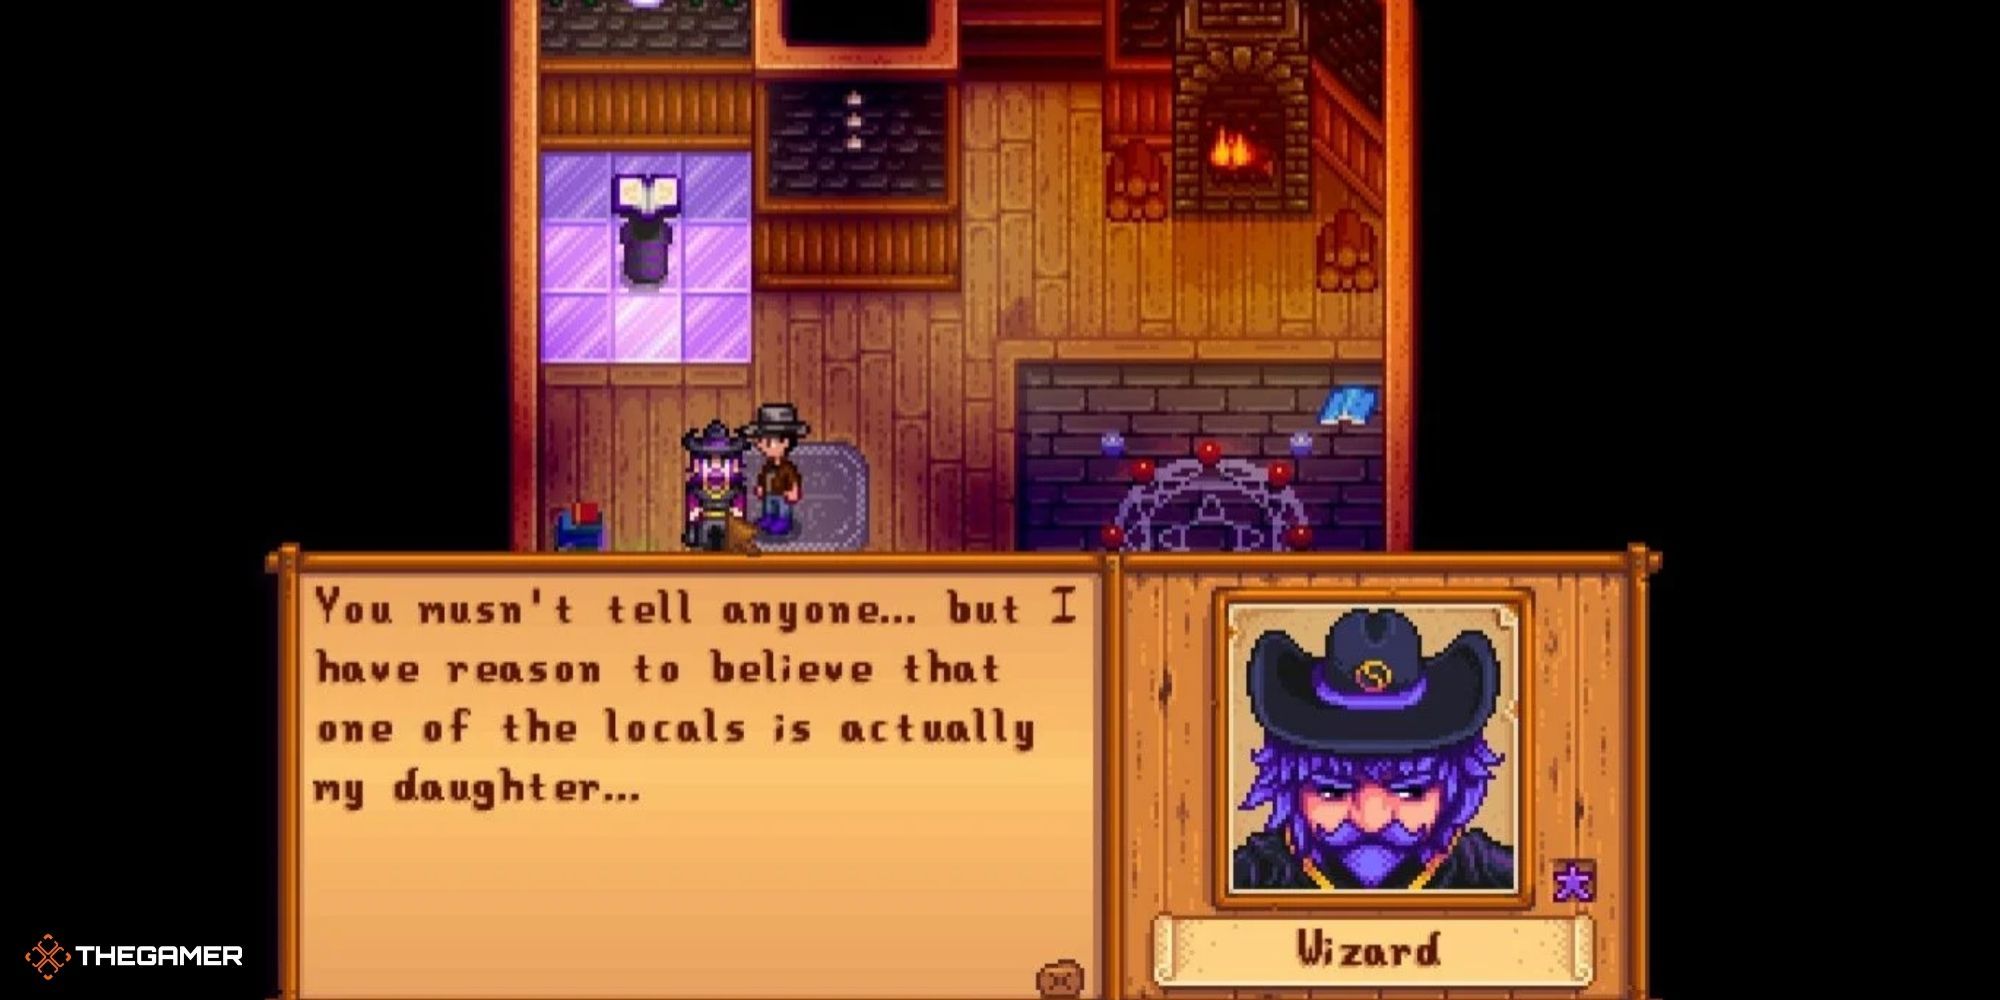 Stardew Valley - Wizard talking about his daughter